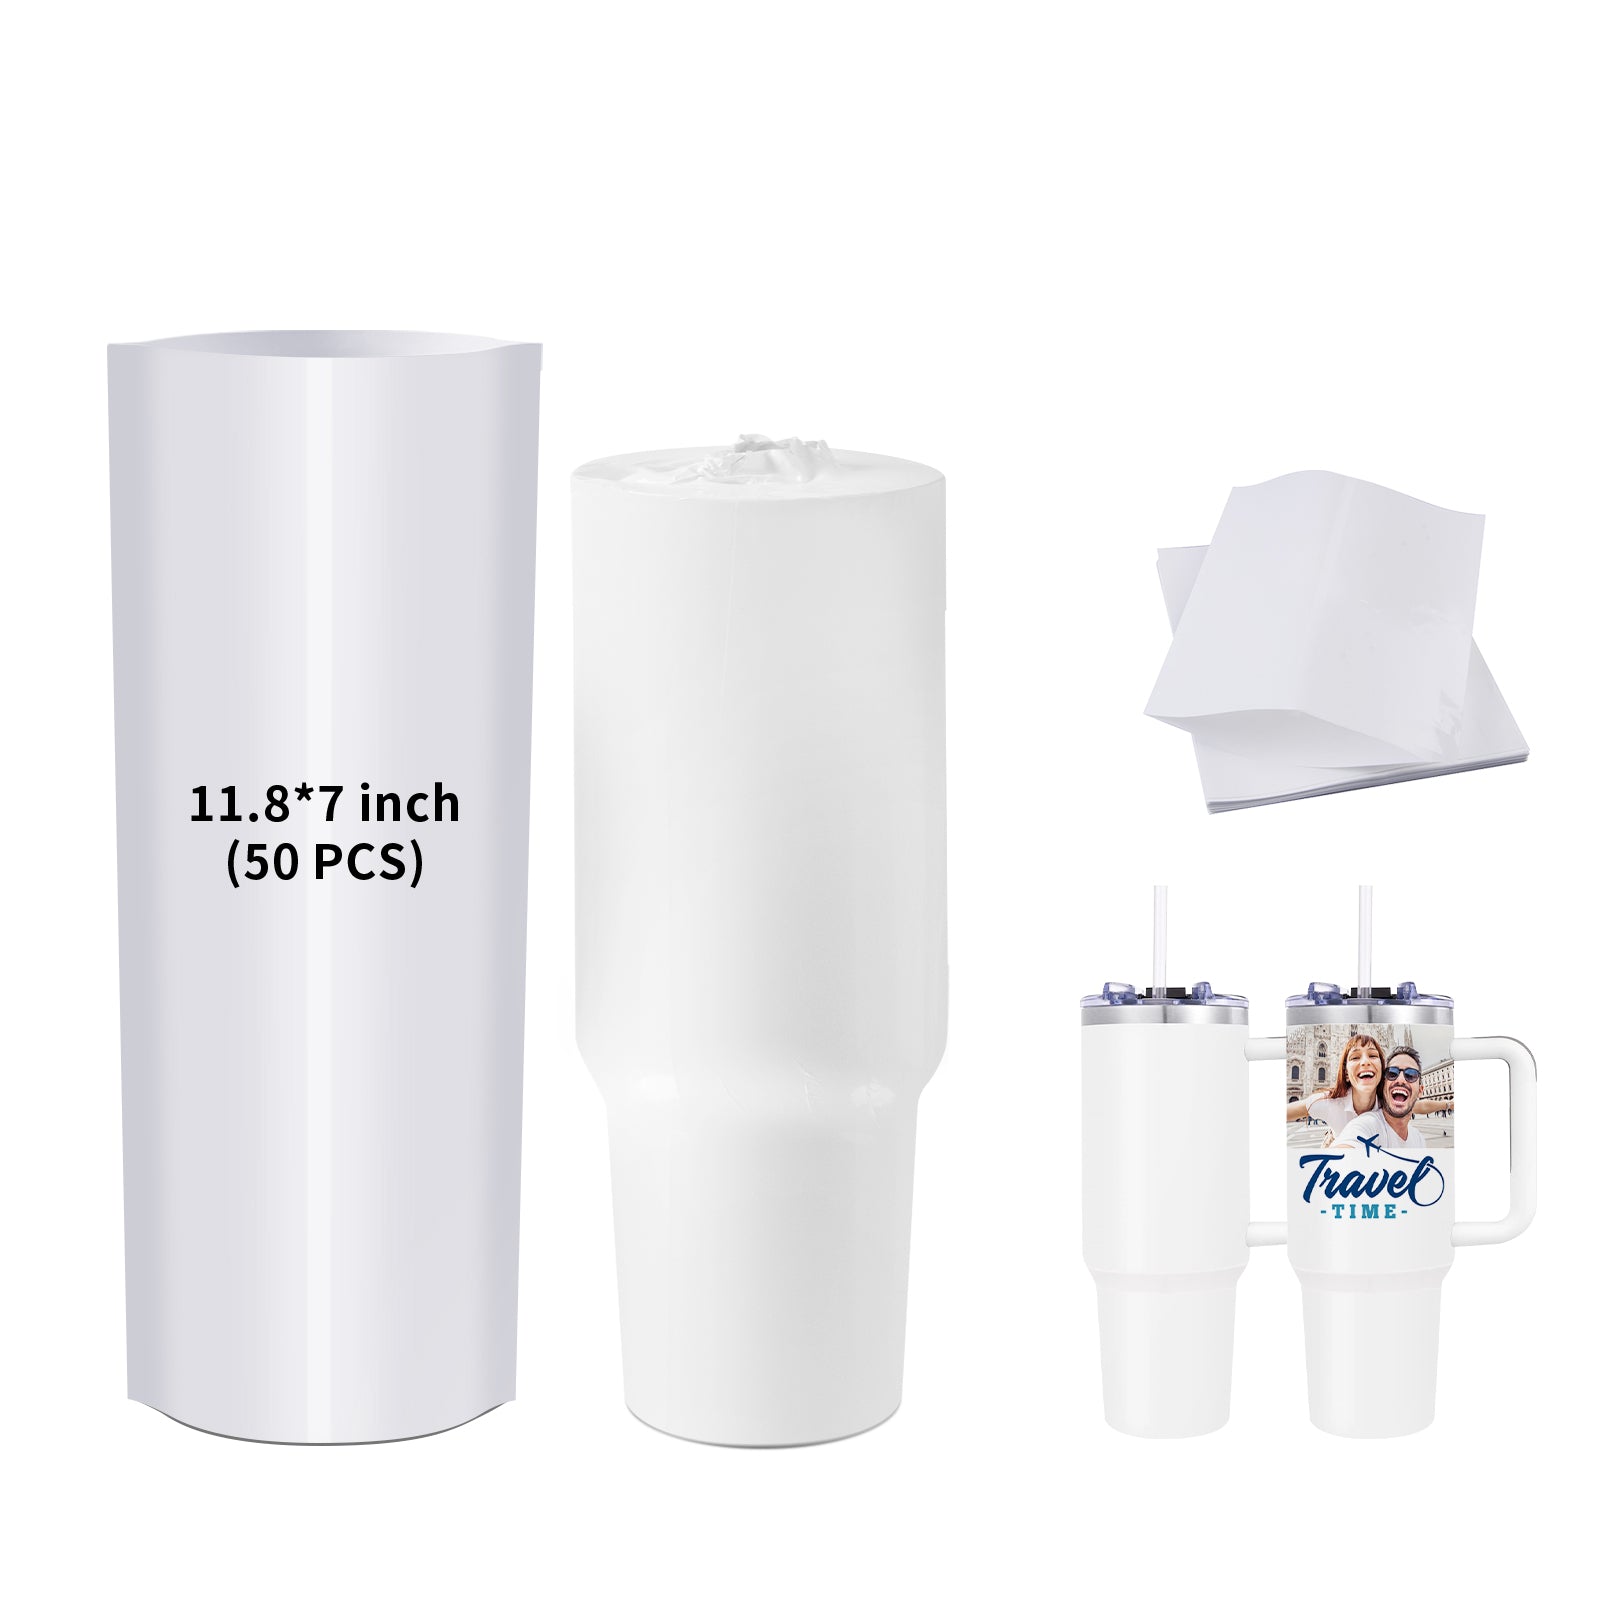 Starter Package 3 Sublimation Oven 25L Adventure Tumblers 40 oz with R –  PYD LIFE